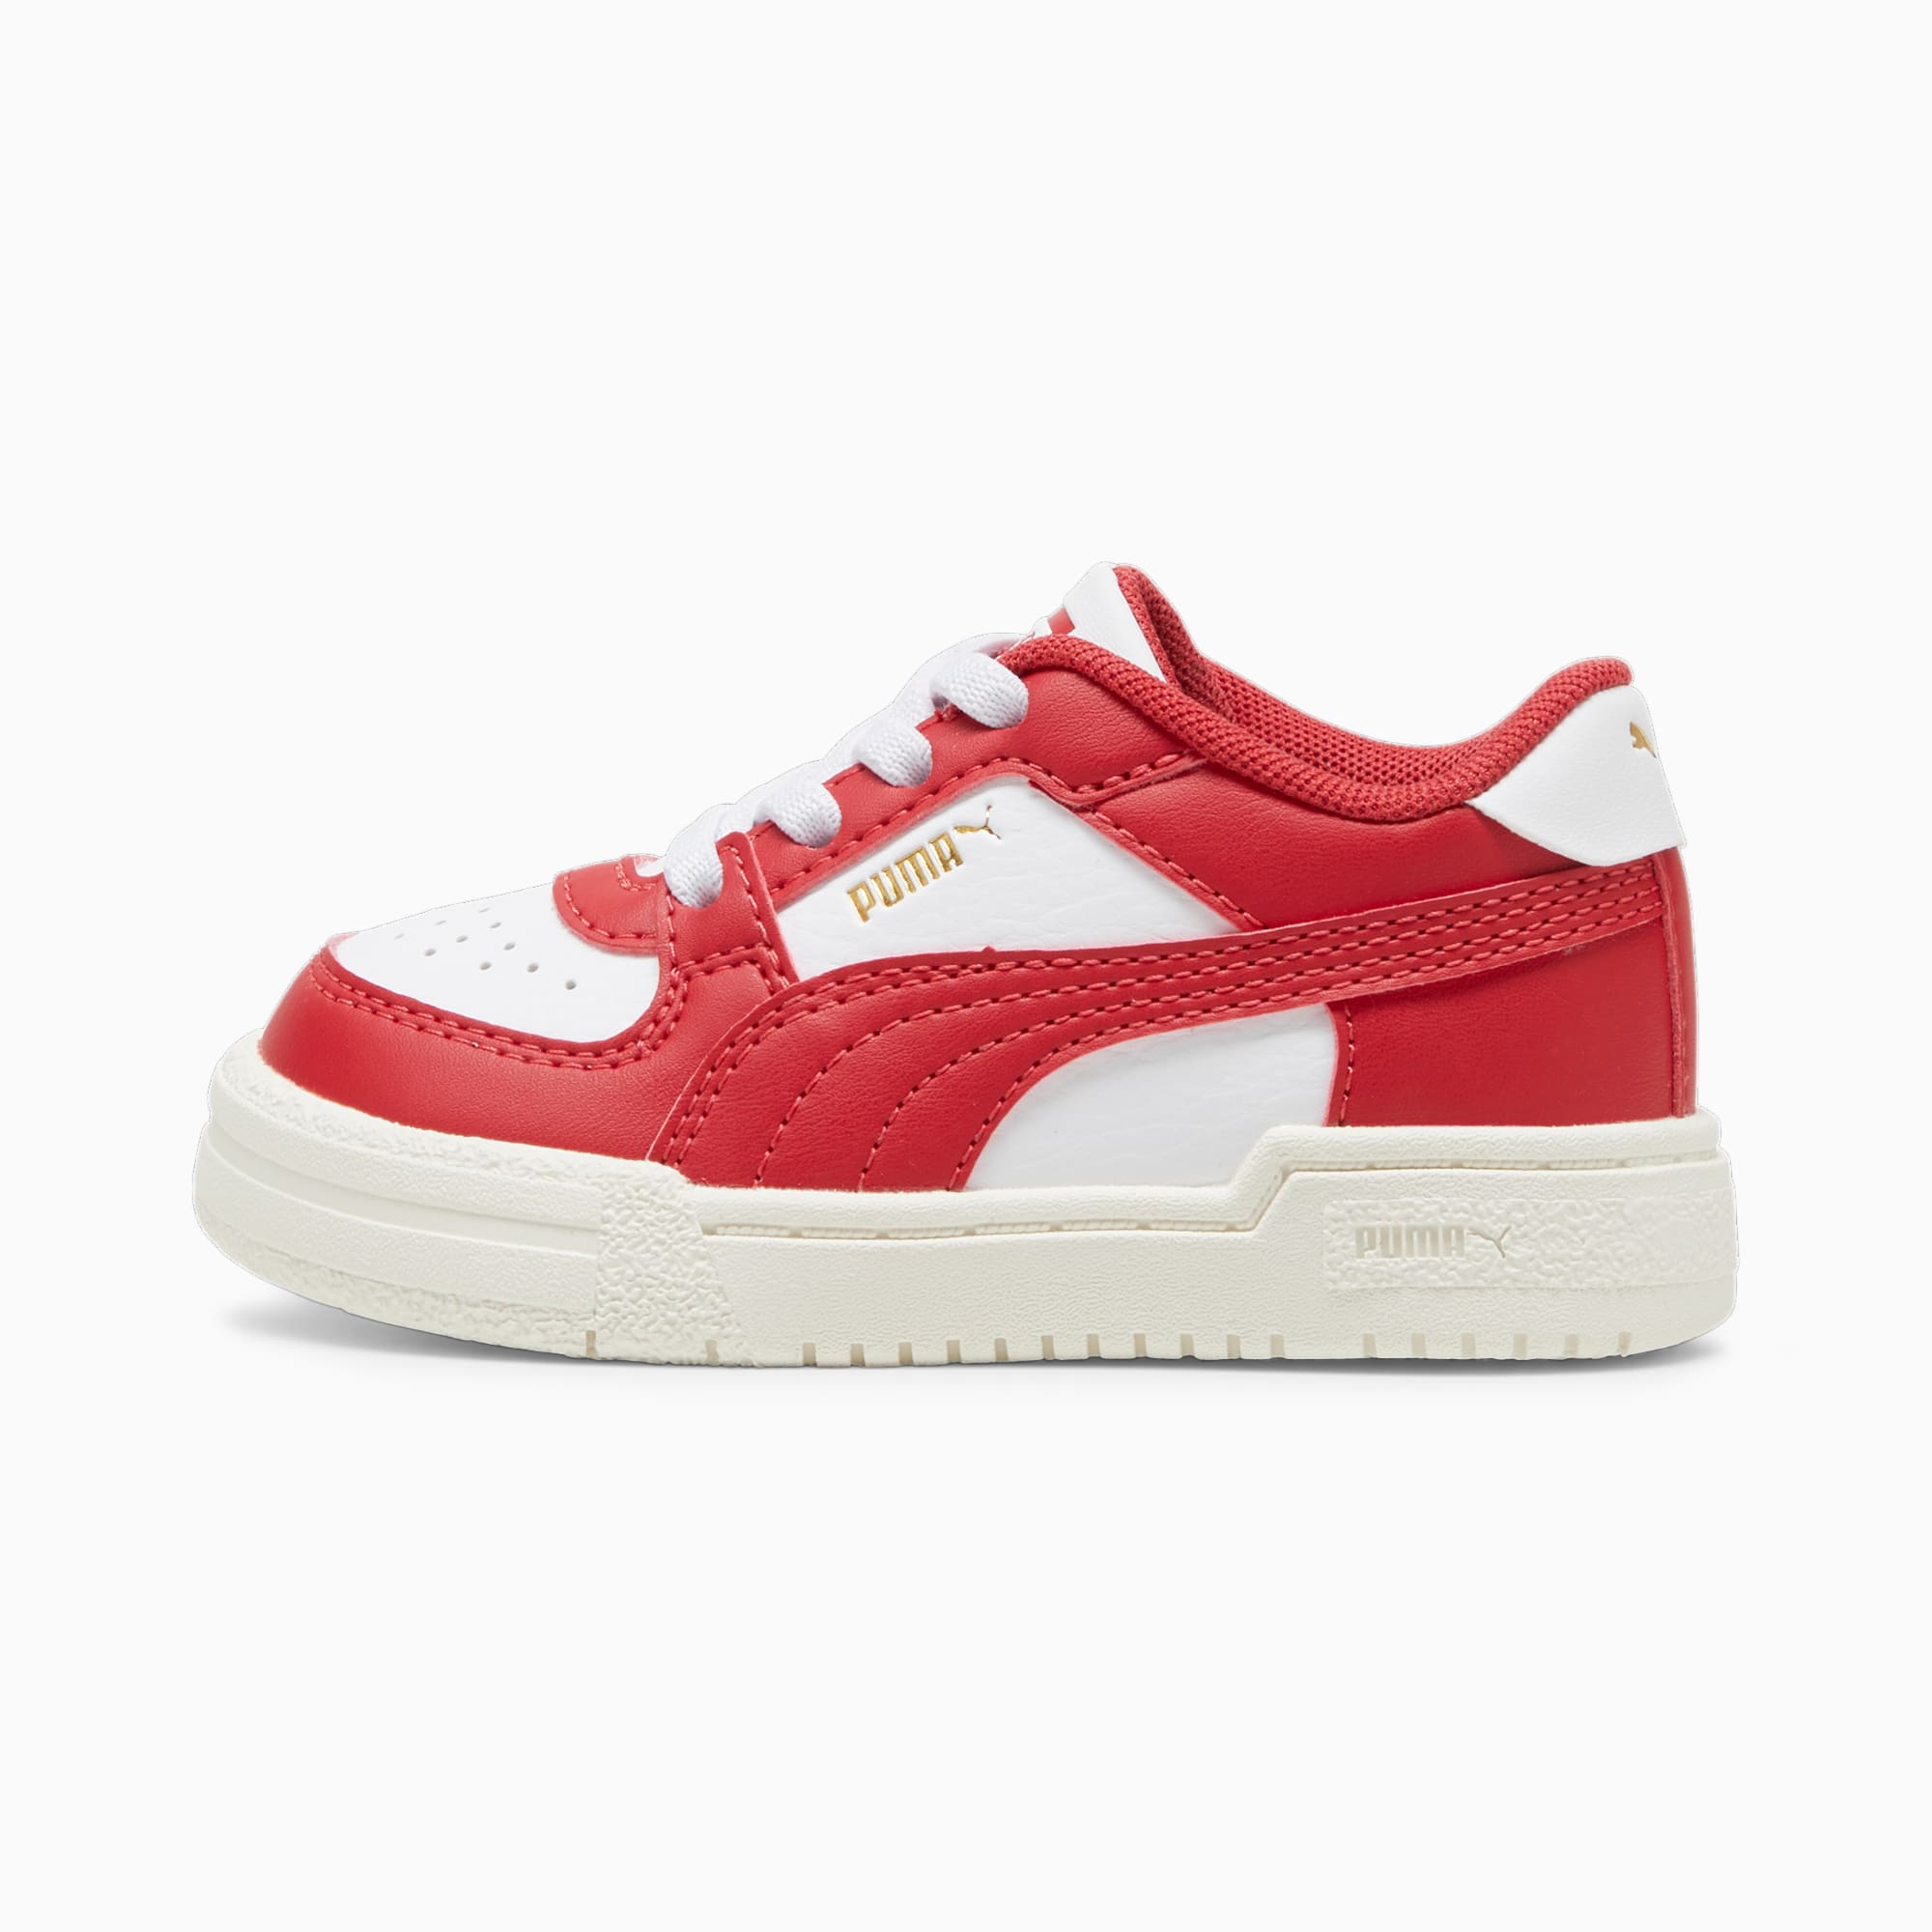 PUMA Ca Pro Classic AC Babies' Trainers, White/Club Red, Size 19, Shoes